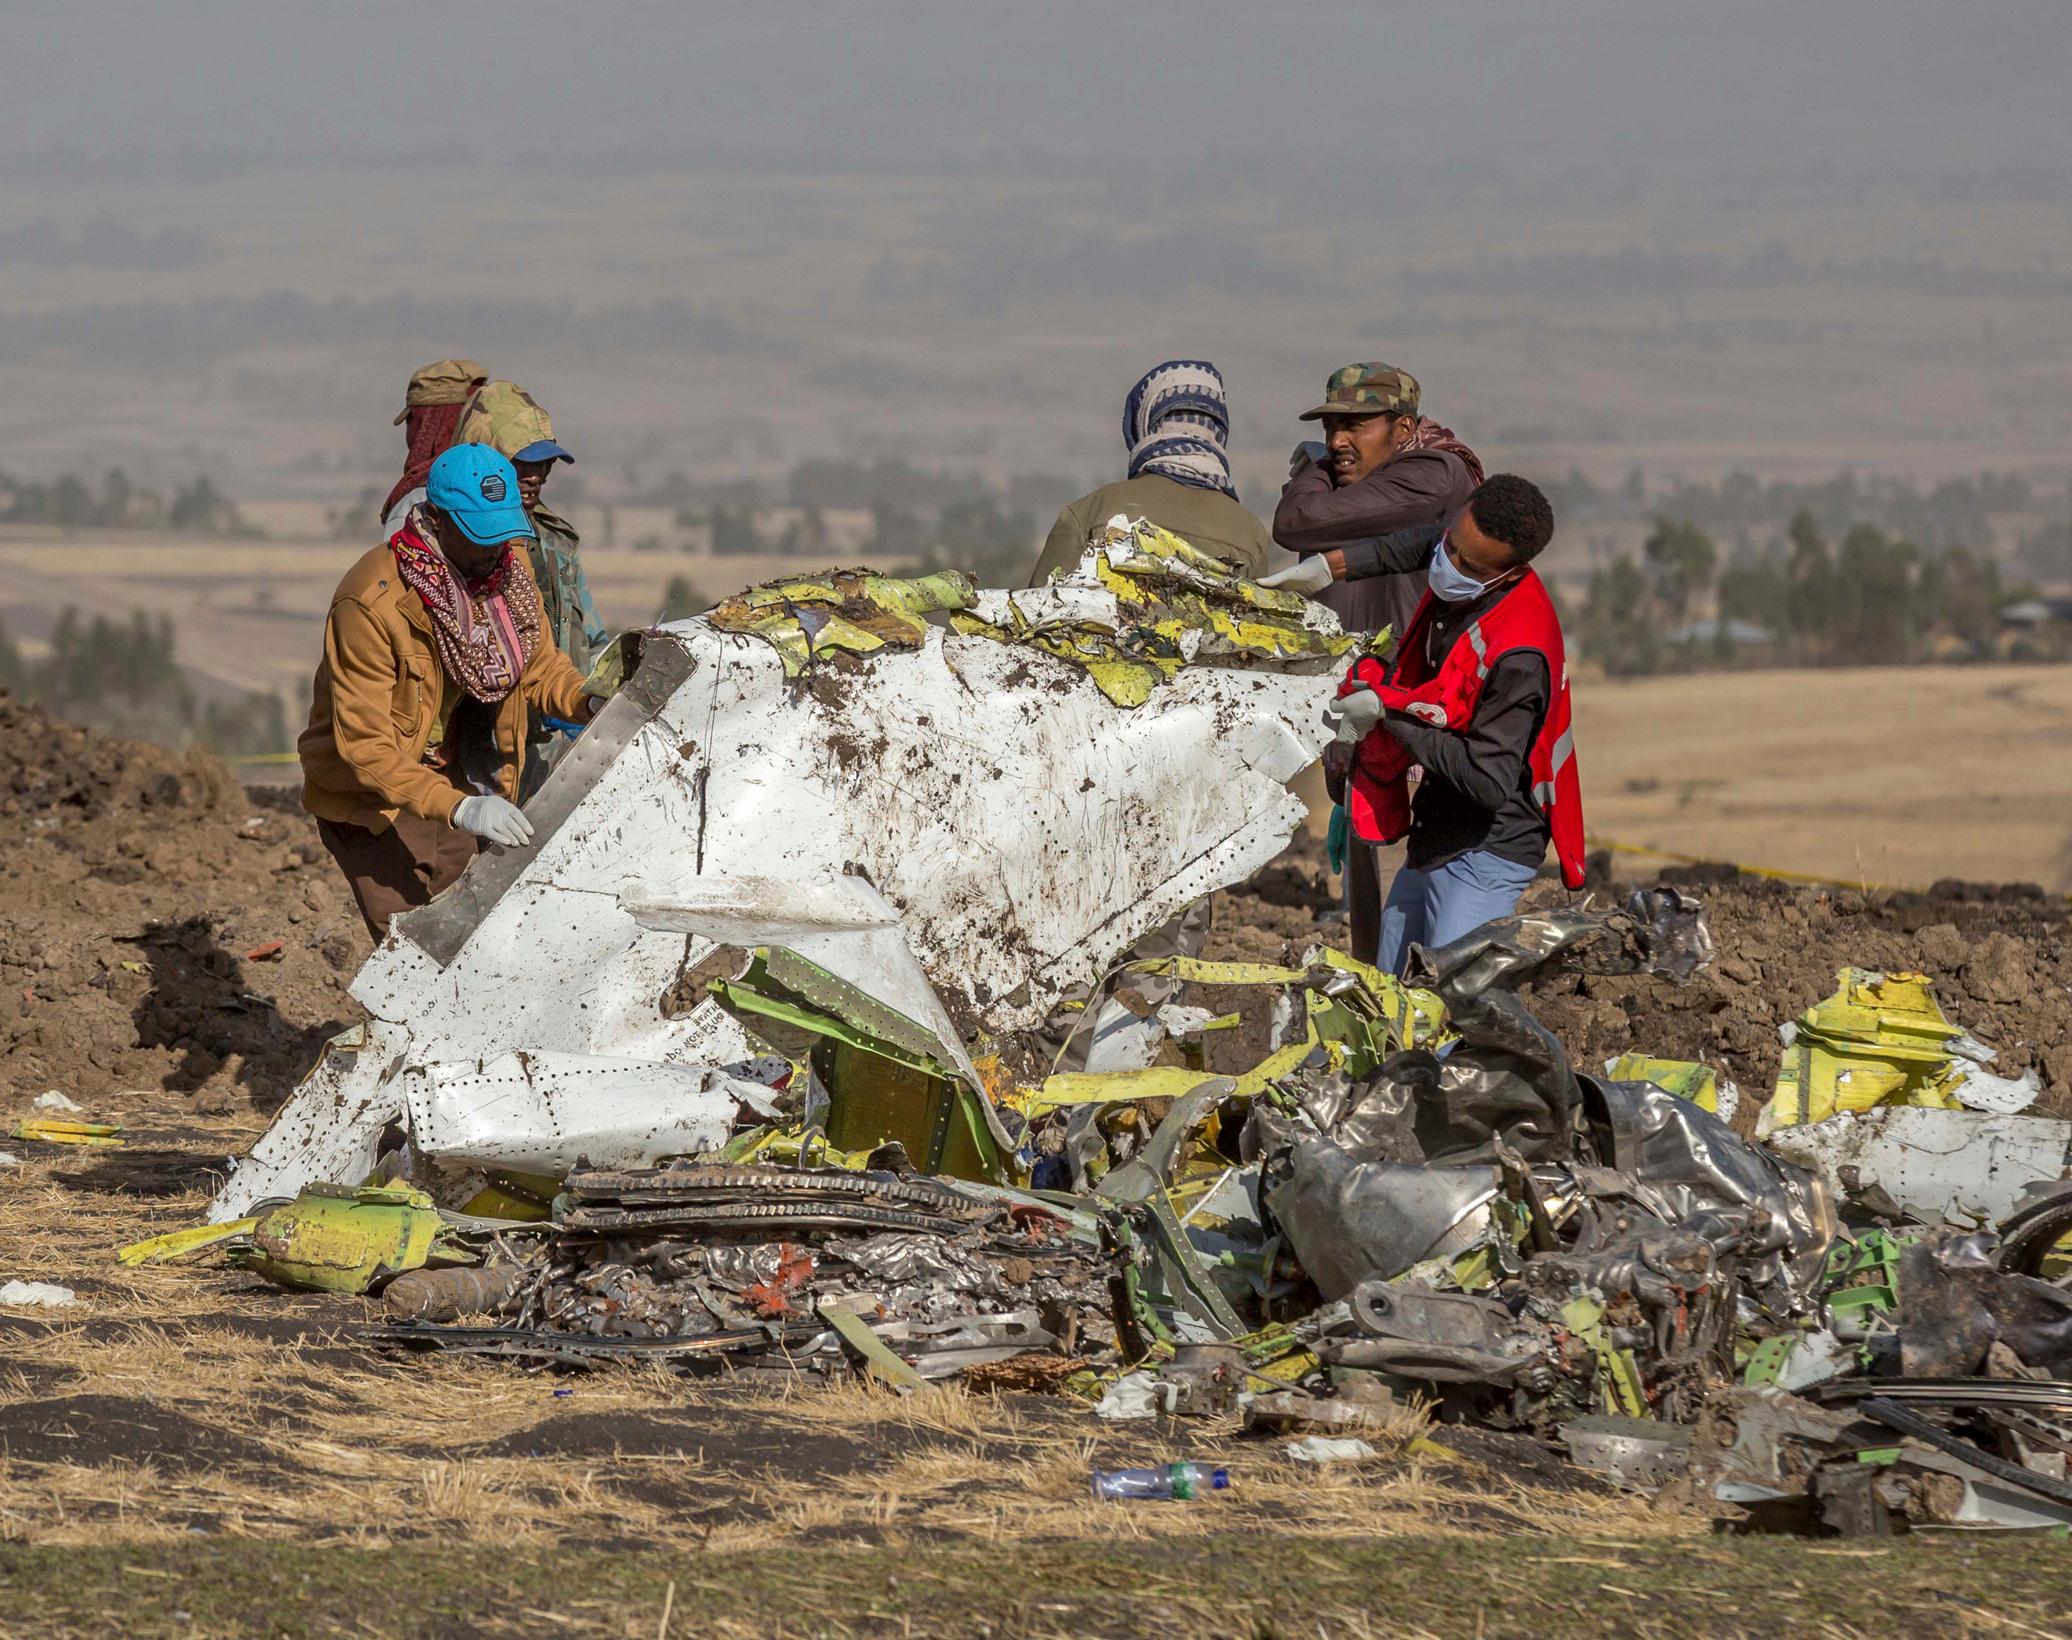 FILE - In this March 11, 2019, file photo, rescuers work at the scene of an Ethiopian Airlines flight crash near Bishoftu, Ethiopia. Pilot Bernd Kai von Hoesslin pleaded with his bosses for more training on the Boeing Max, just weeks before the Ethiopian AirlineÄôs jet crashed, killing everyone on board. (AP Photo/Mulugeta Ayene, File)